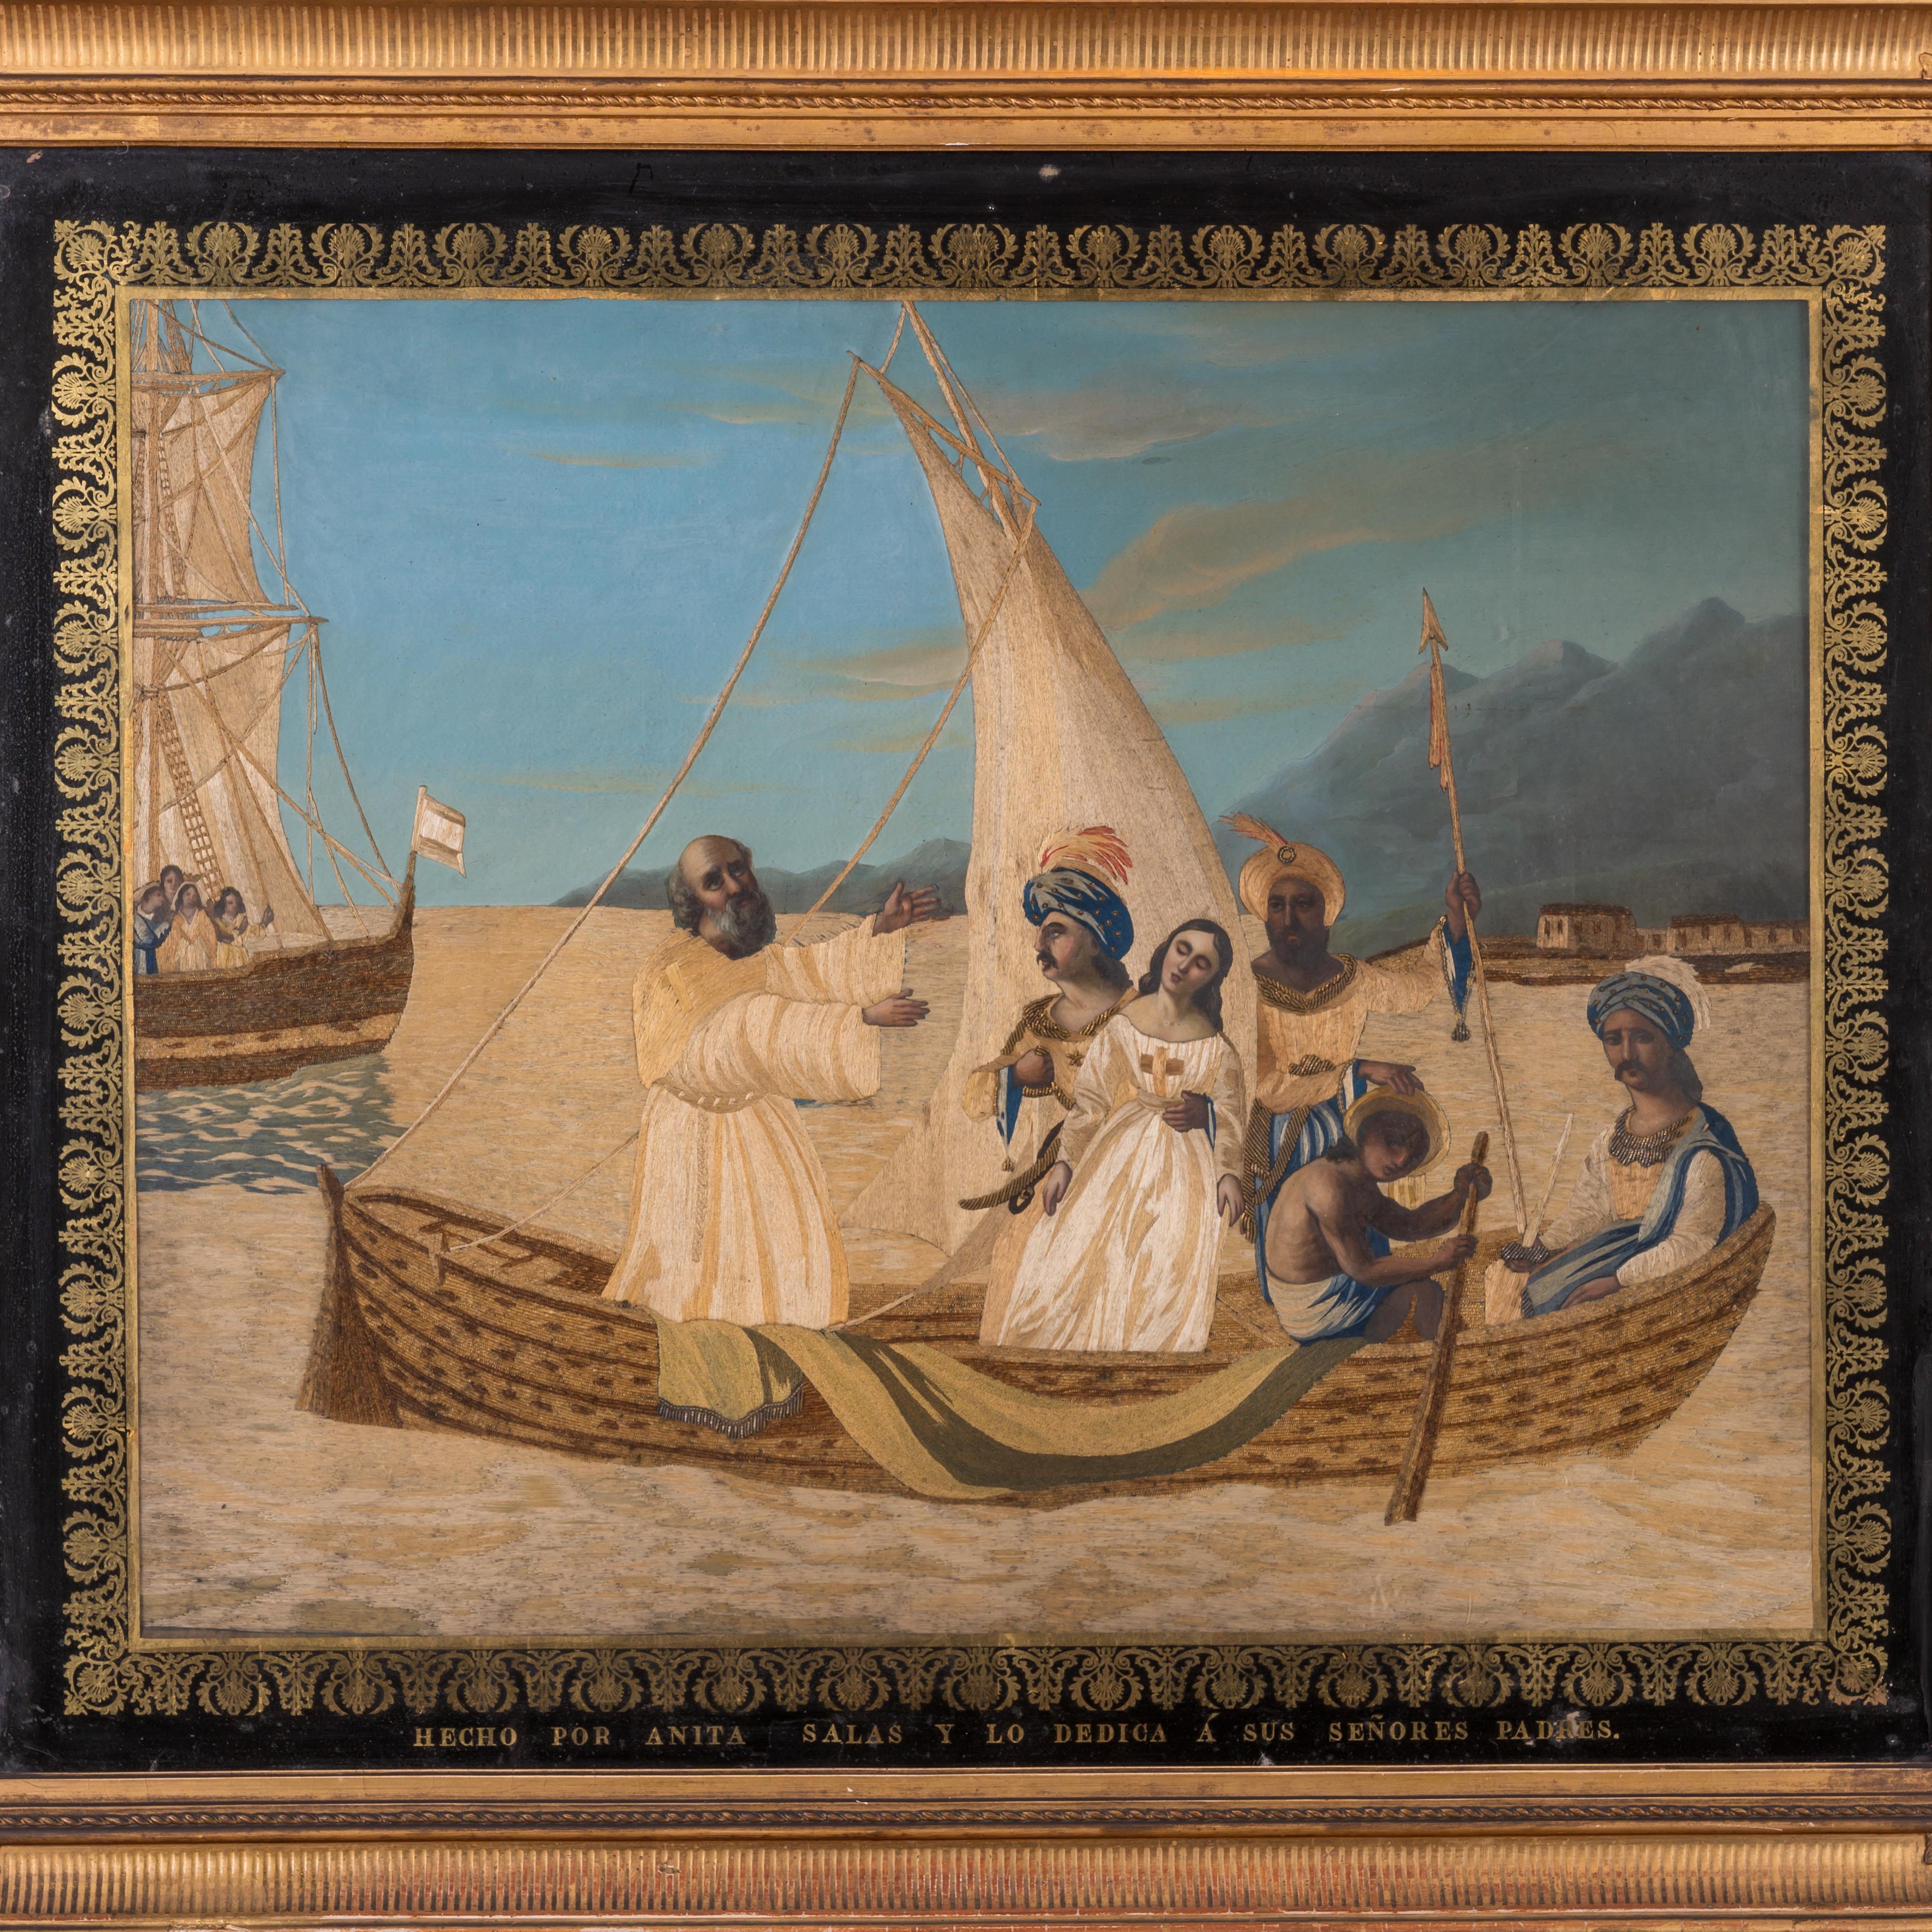 A South American historic Catholic painting with needlework under eglomise glass in gilt frame, c. mid 19th century.  Similar pieces attributed to artists from the historic Universidad del Rosario in Bogota.  Possibly a Barbary pirate kidnapping